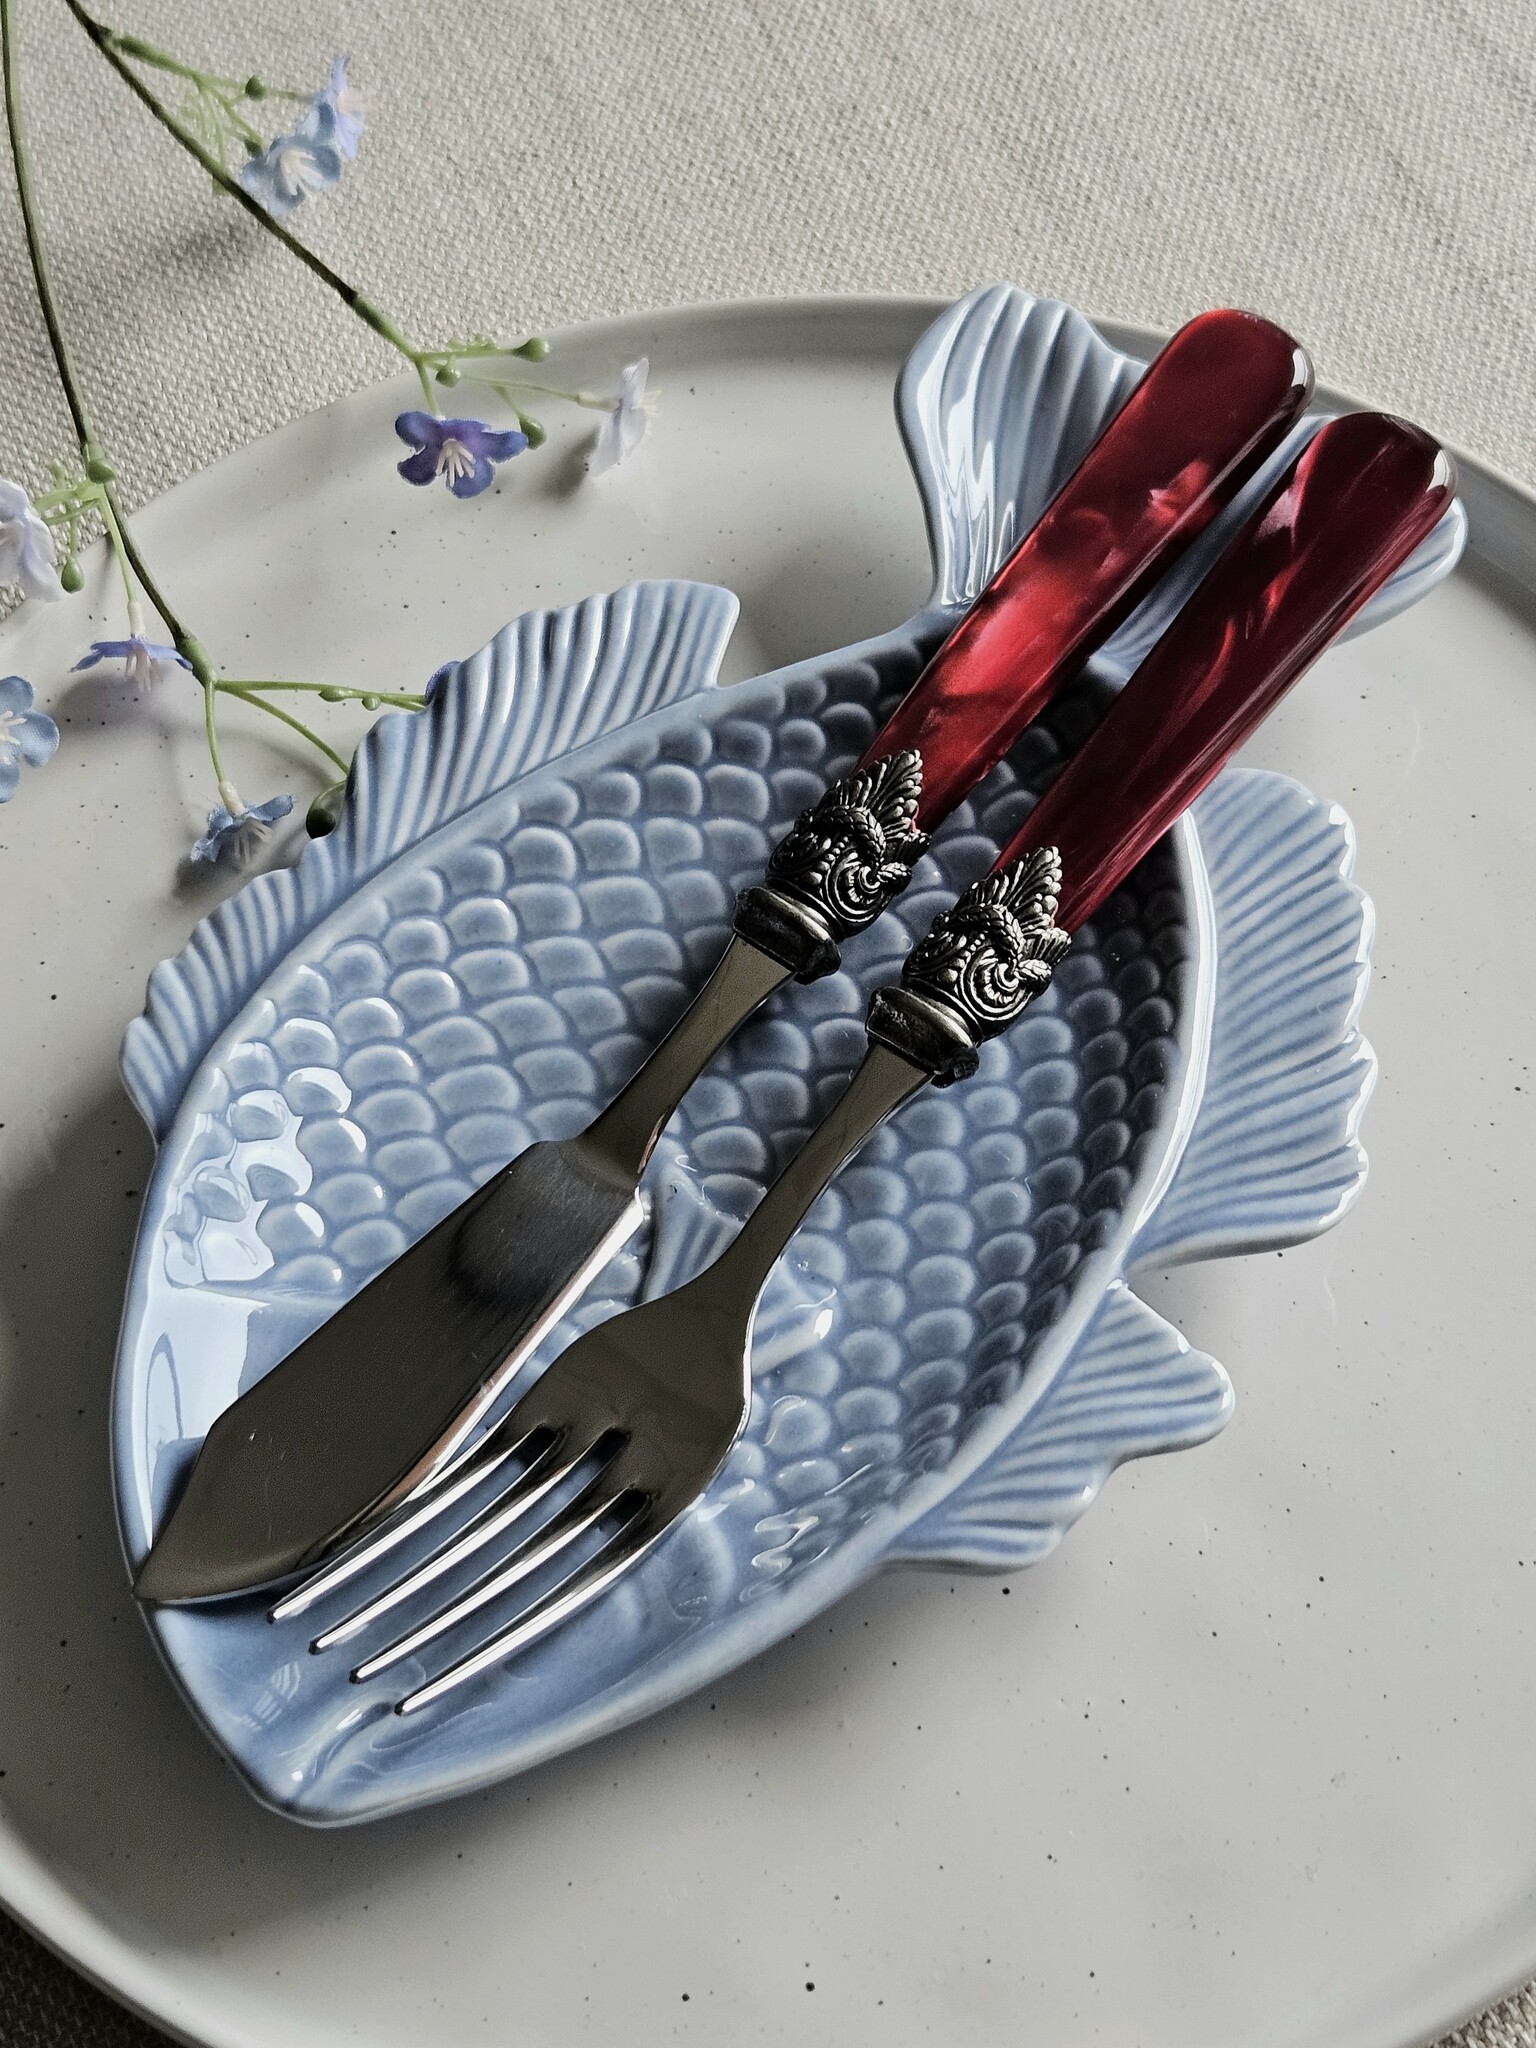 2-piece Fish Cutlery Set (fish knife, fish fork), Red with Mother of Pearl,  1 person